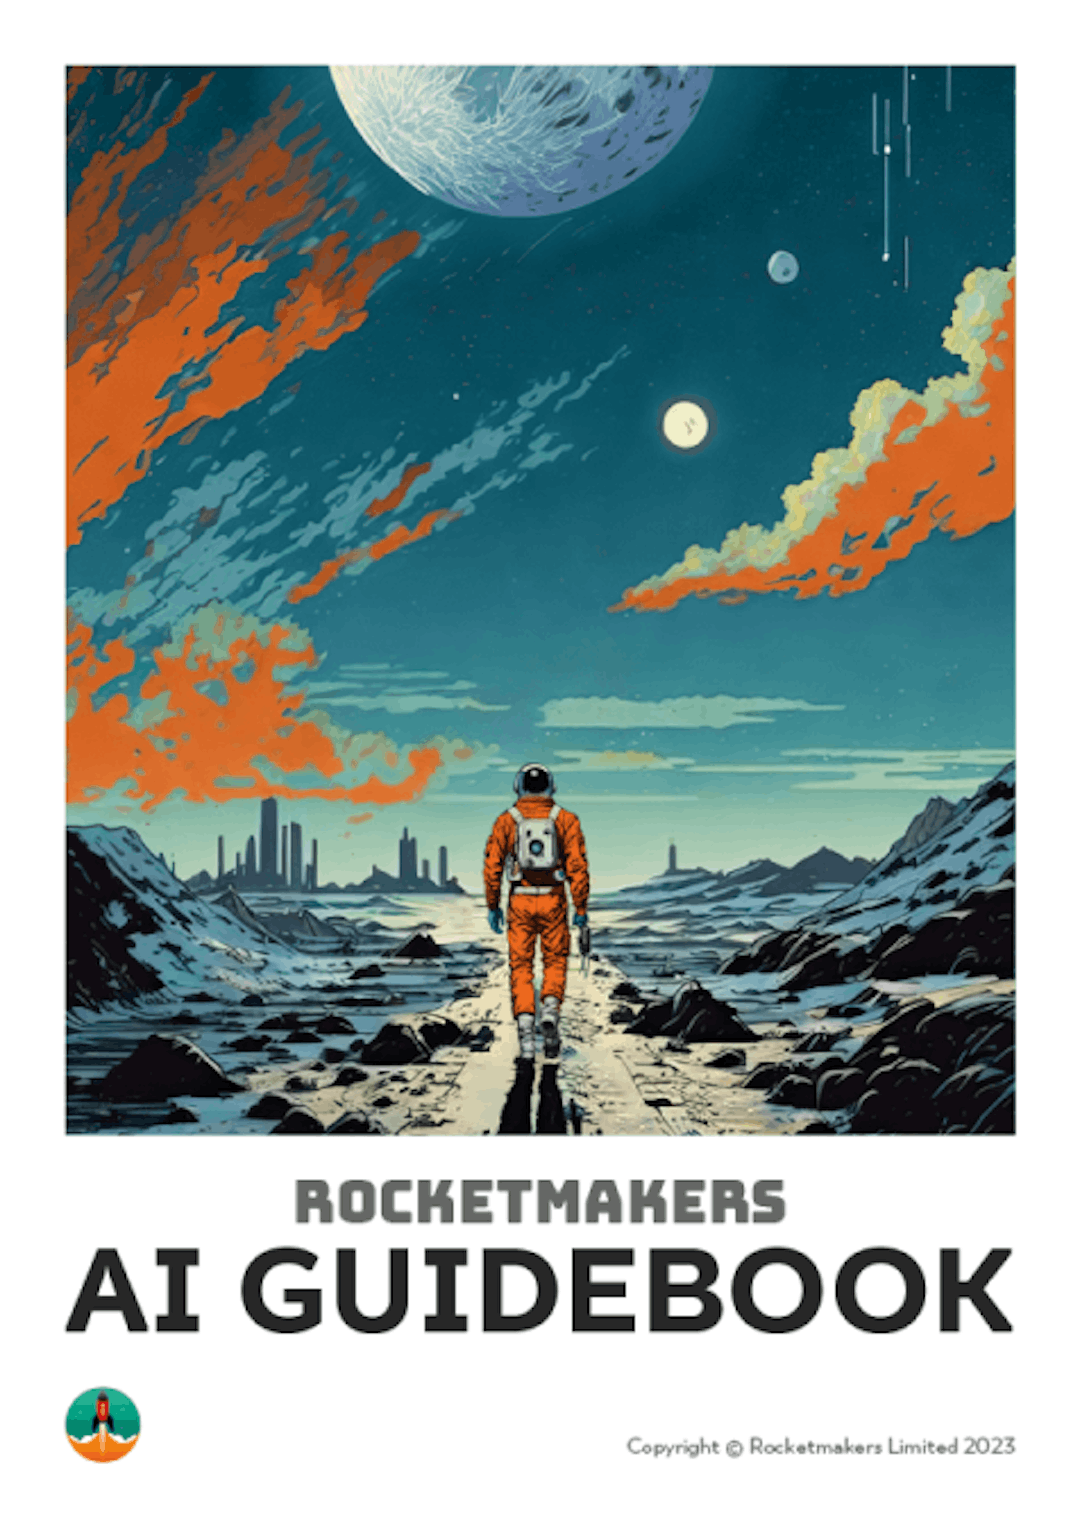 Cover of the Rocketmakers AI Guidebook which depicts a man walking a rough terrain under a bright moon